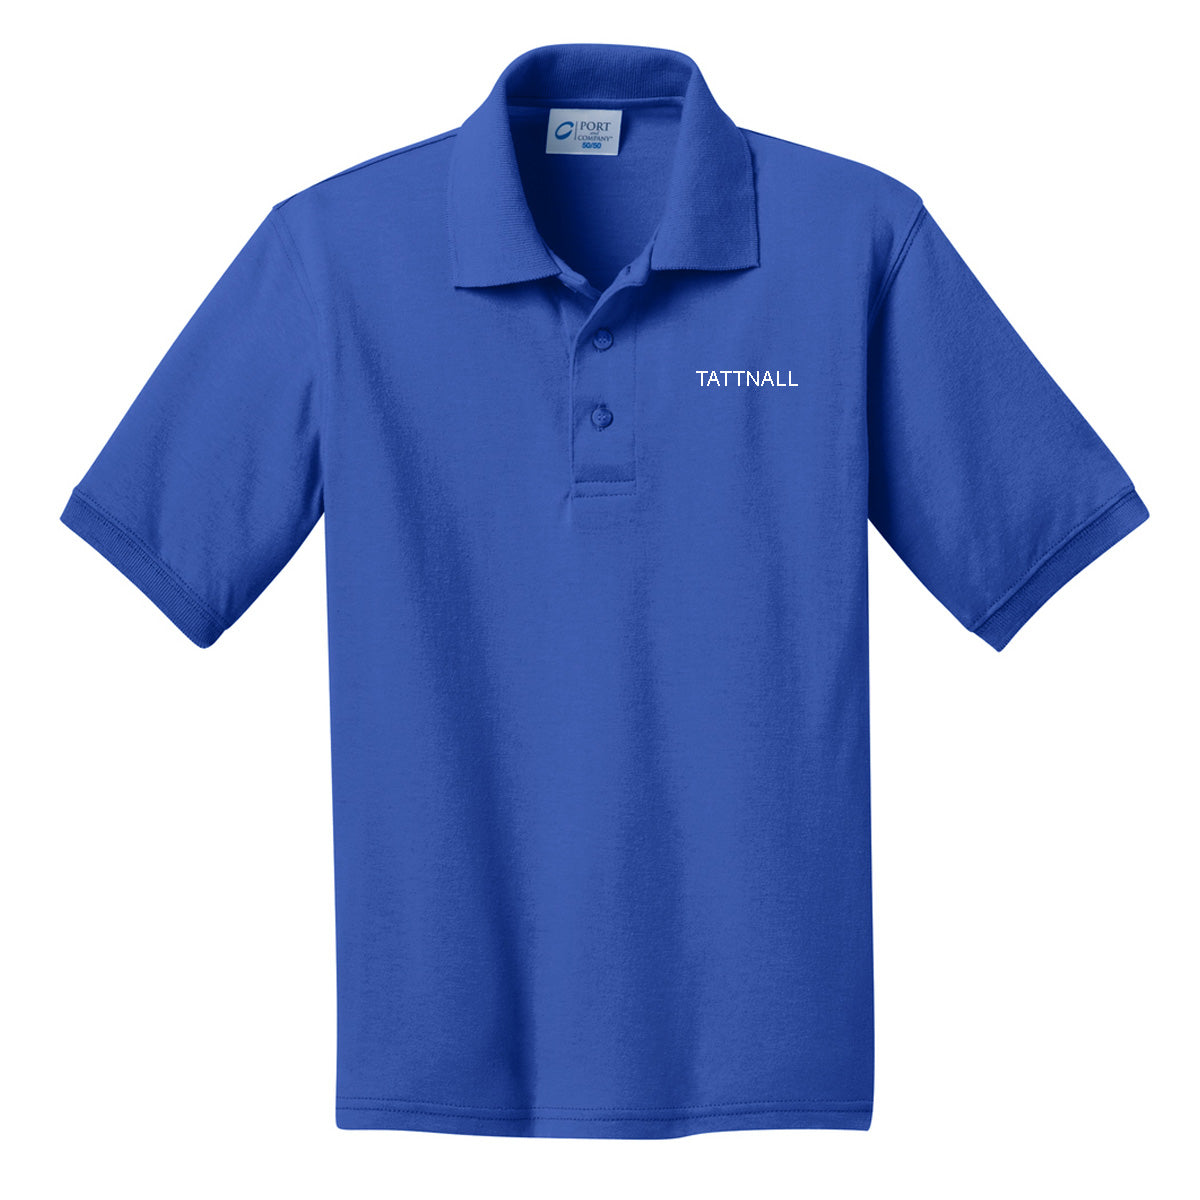 Tattnall - Toddler/Youth Polo with Tattnall - Royal (KP55Y) - Southern Grace Creations